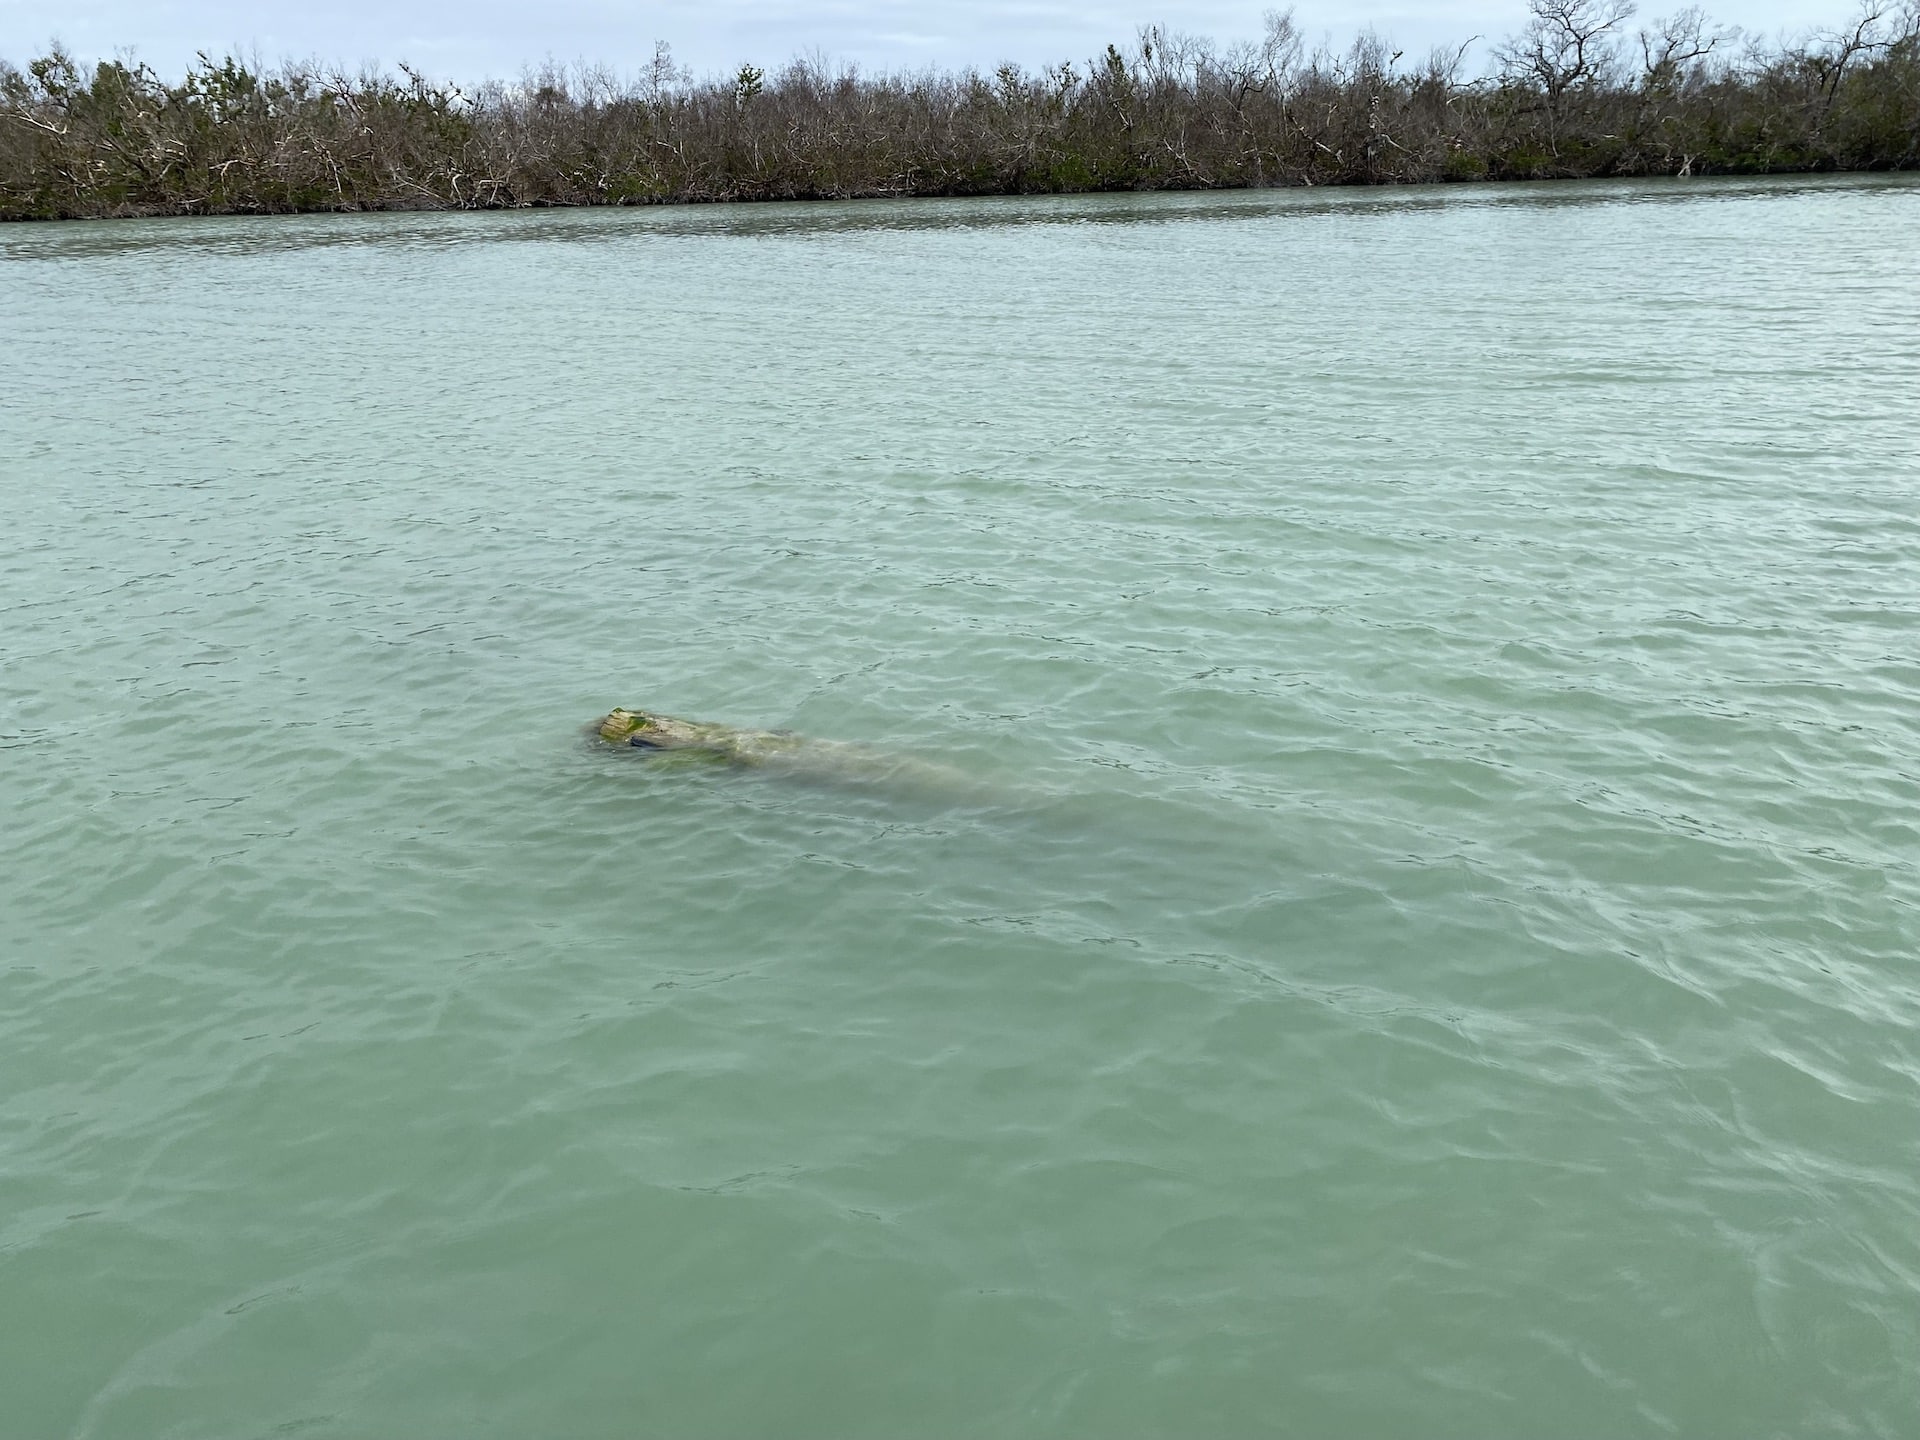 A large piece of debris just underneath the surface of the water near Ft. Myers after Hurricane Ian.